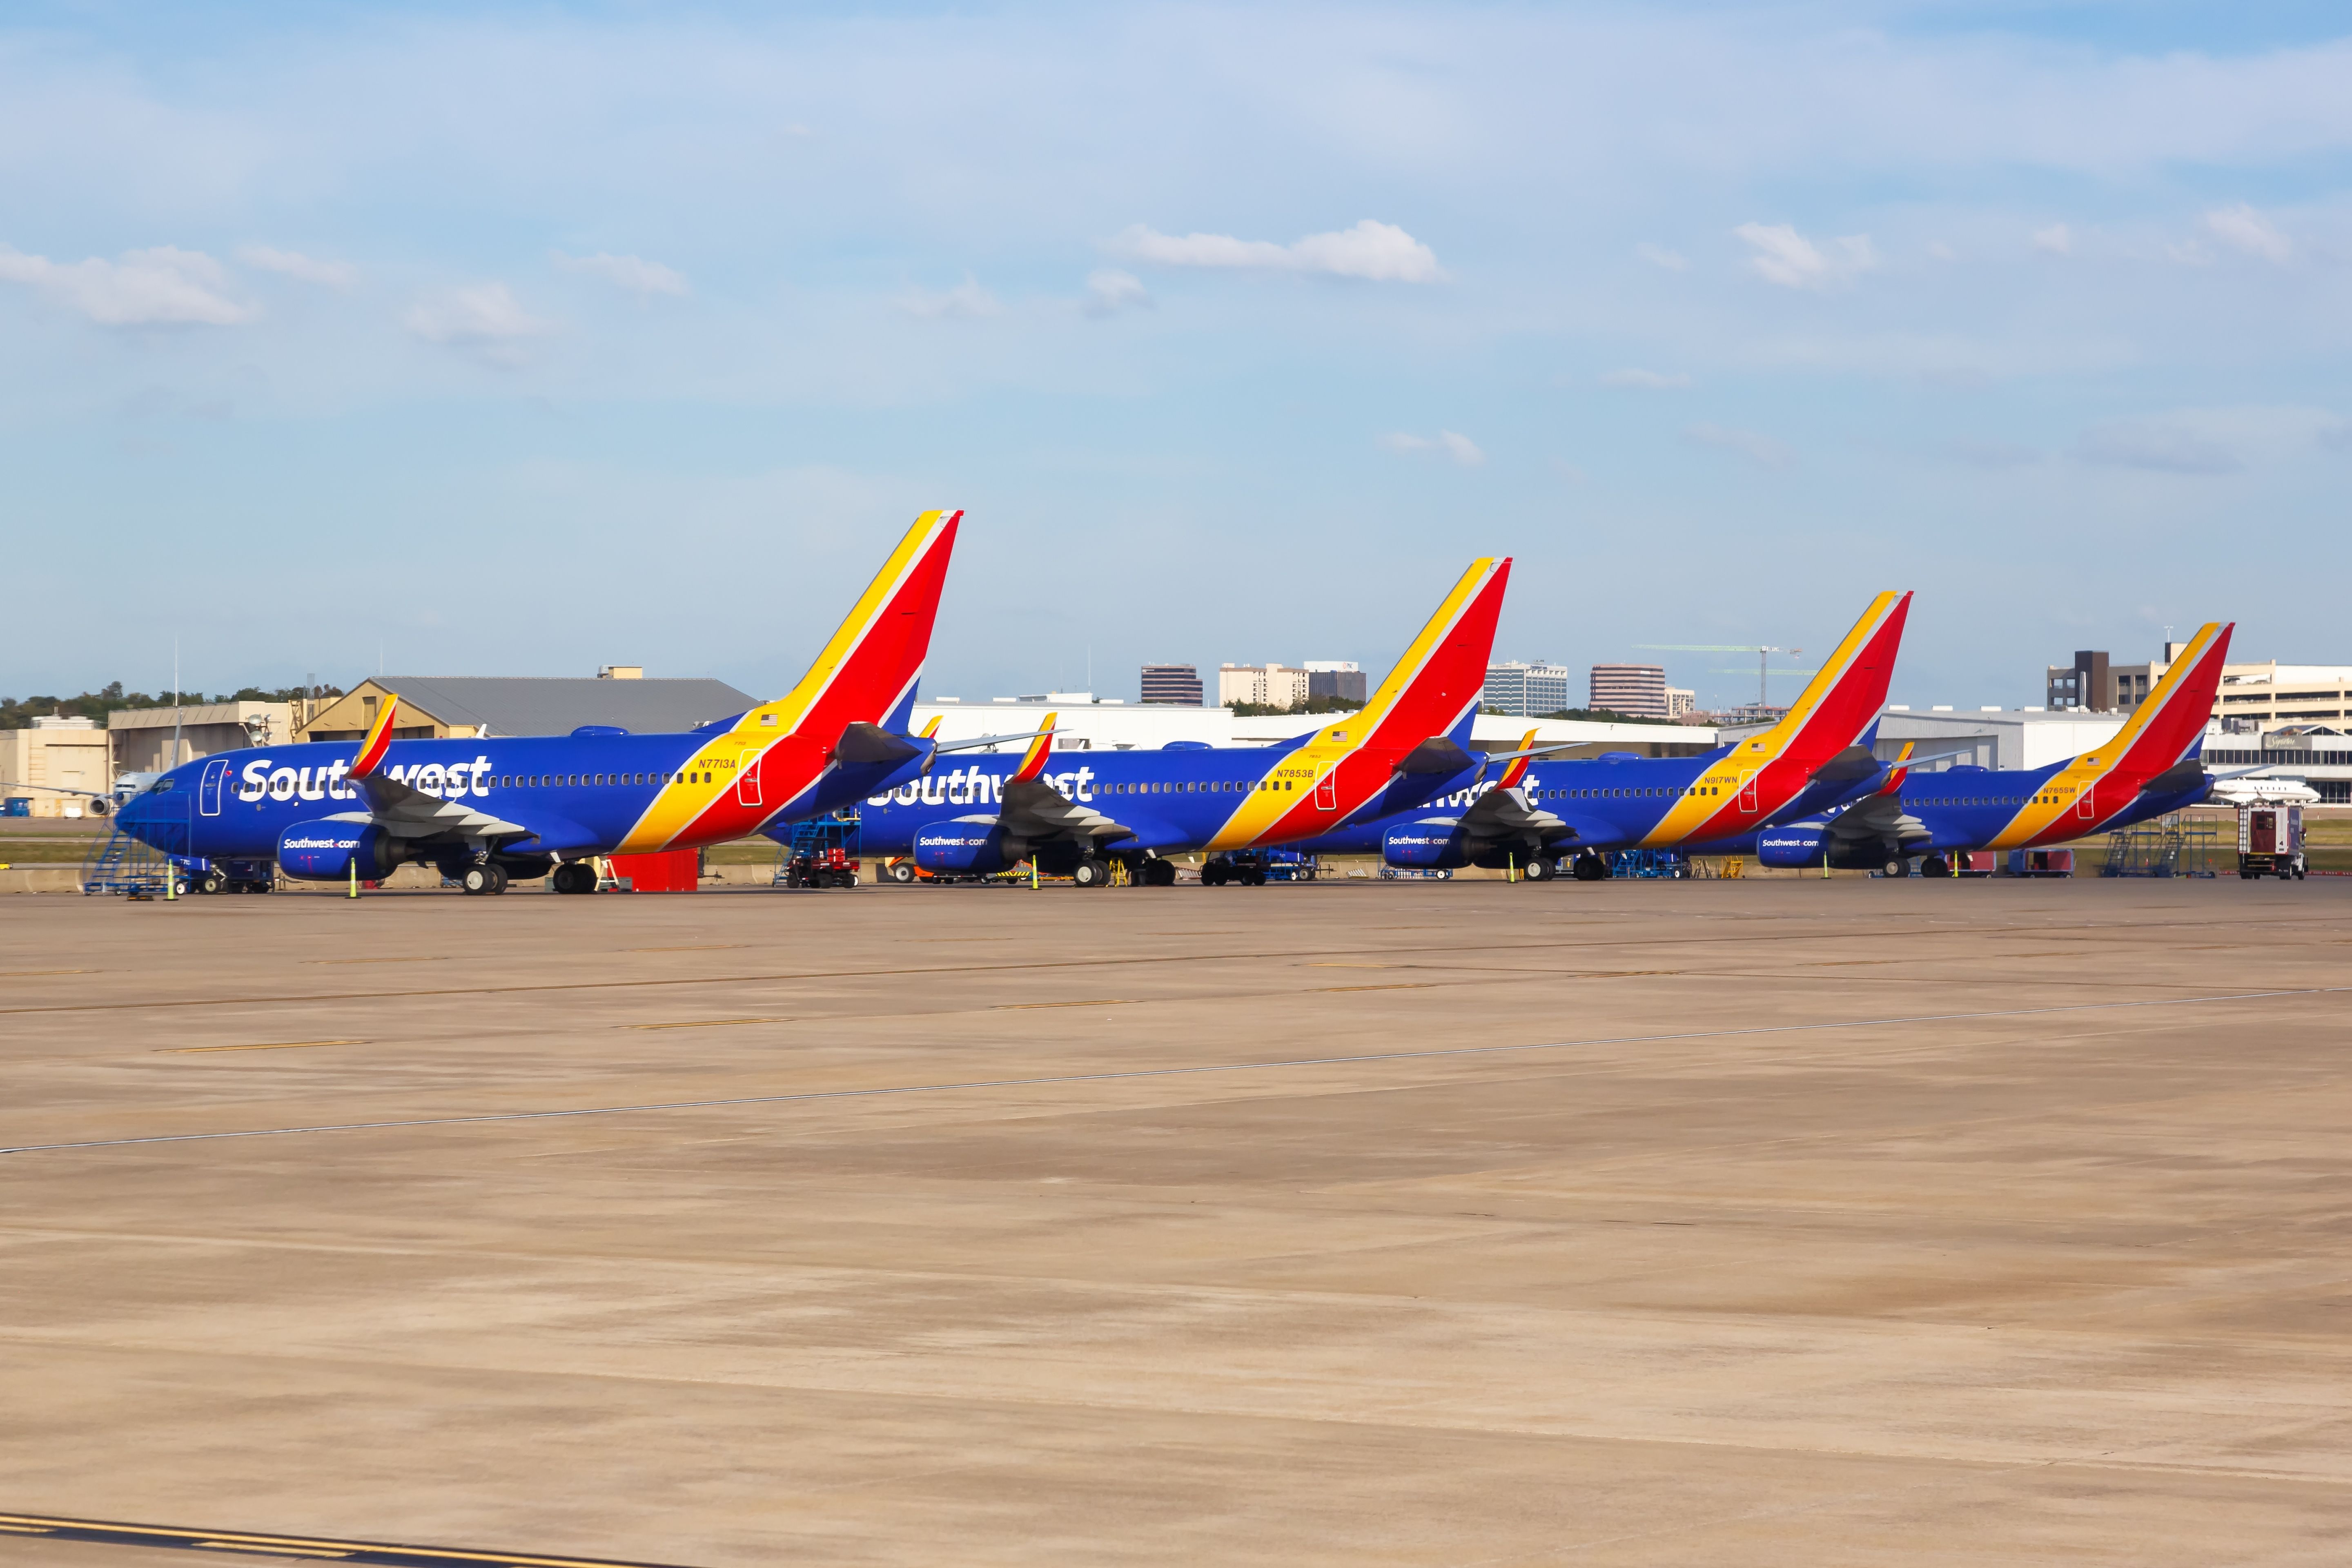 Dallas, United States – November 9, 2022: Southwest Airlines Boeing 737 airplanes at Dallas Love Field airport (DAL) in the United States.